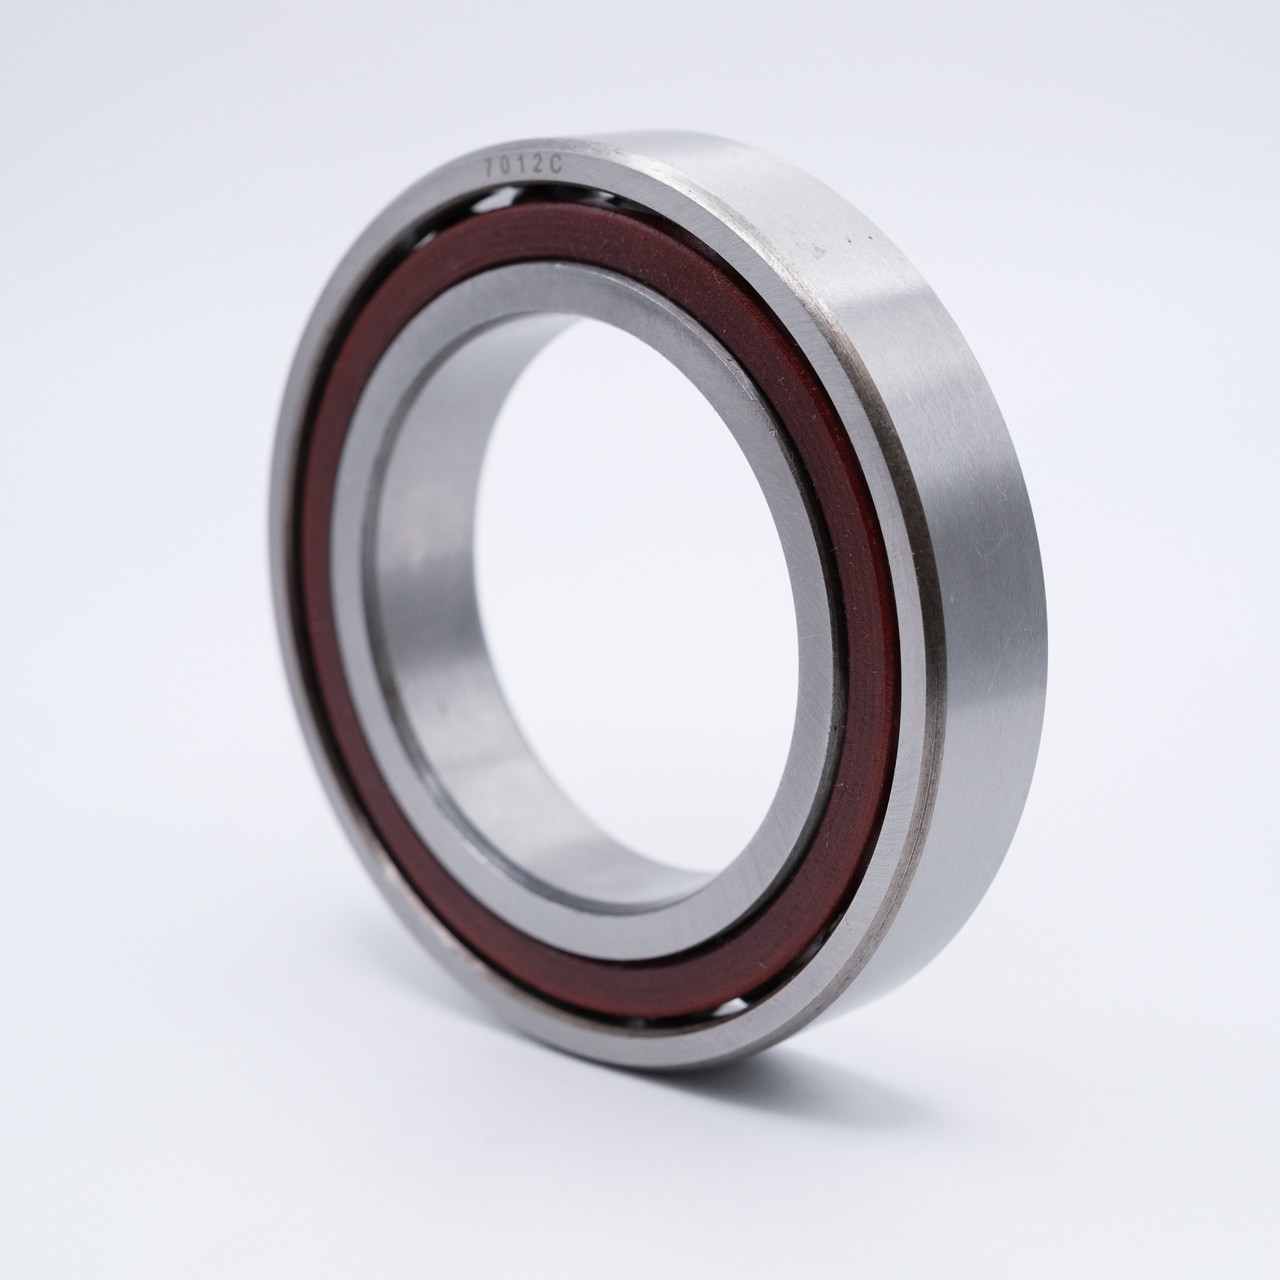 B7003C-T-P4S-UL Angular Ball Bearing 17x35x10mm Right Angled View